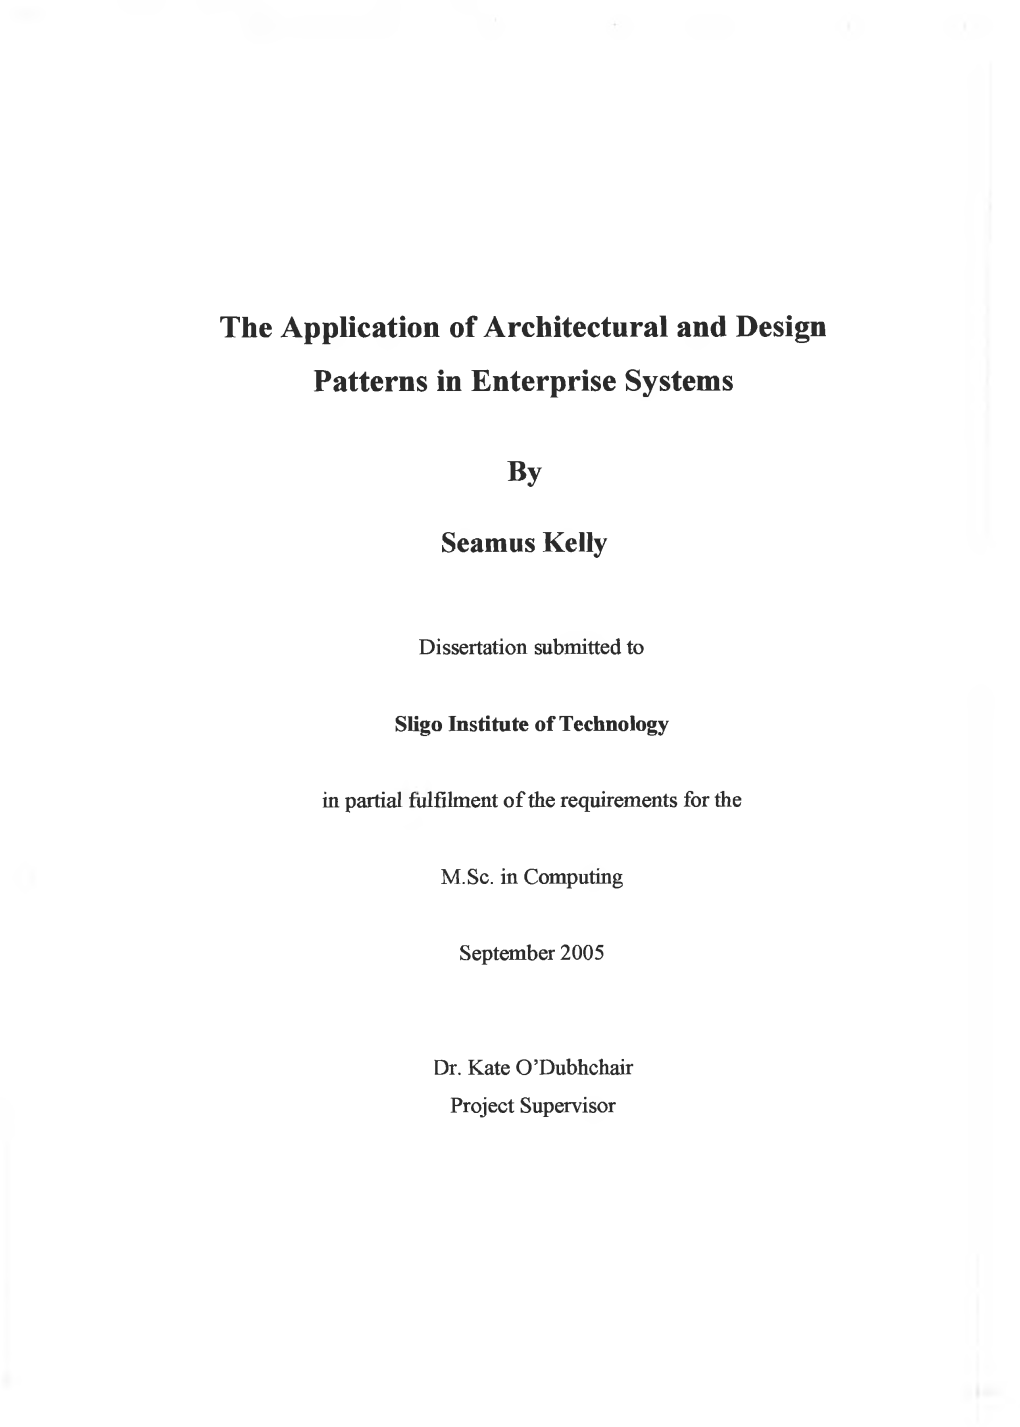 The Application of Architectural and Design Patterns in Enterprise Systems